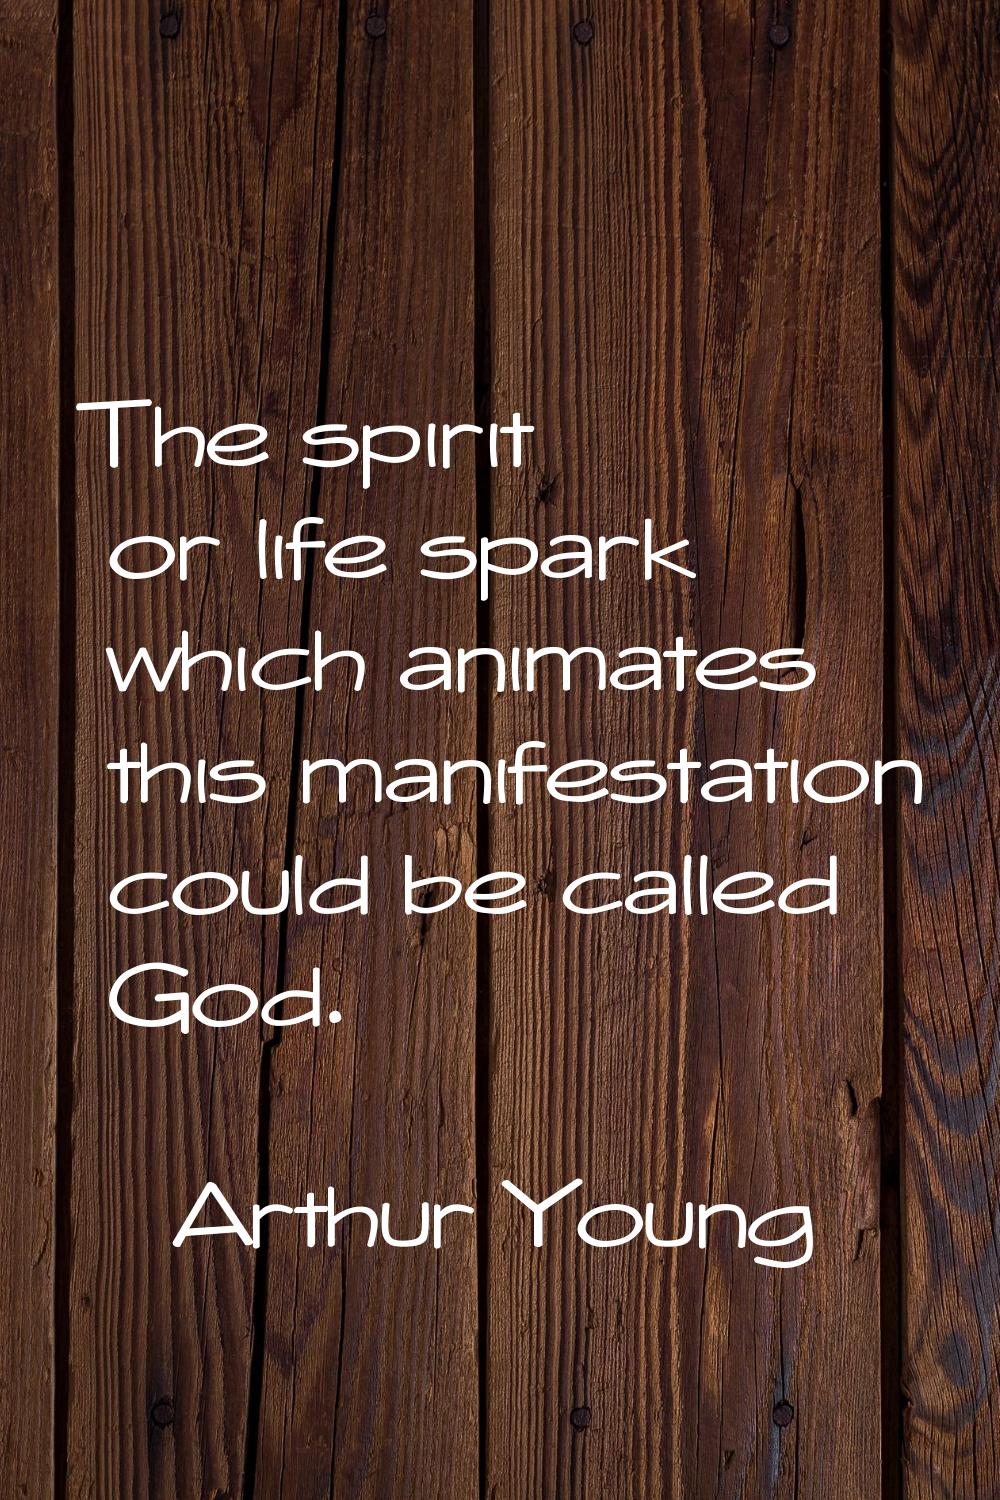 The spirit or life spark which animates this manifestation could be called God.